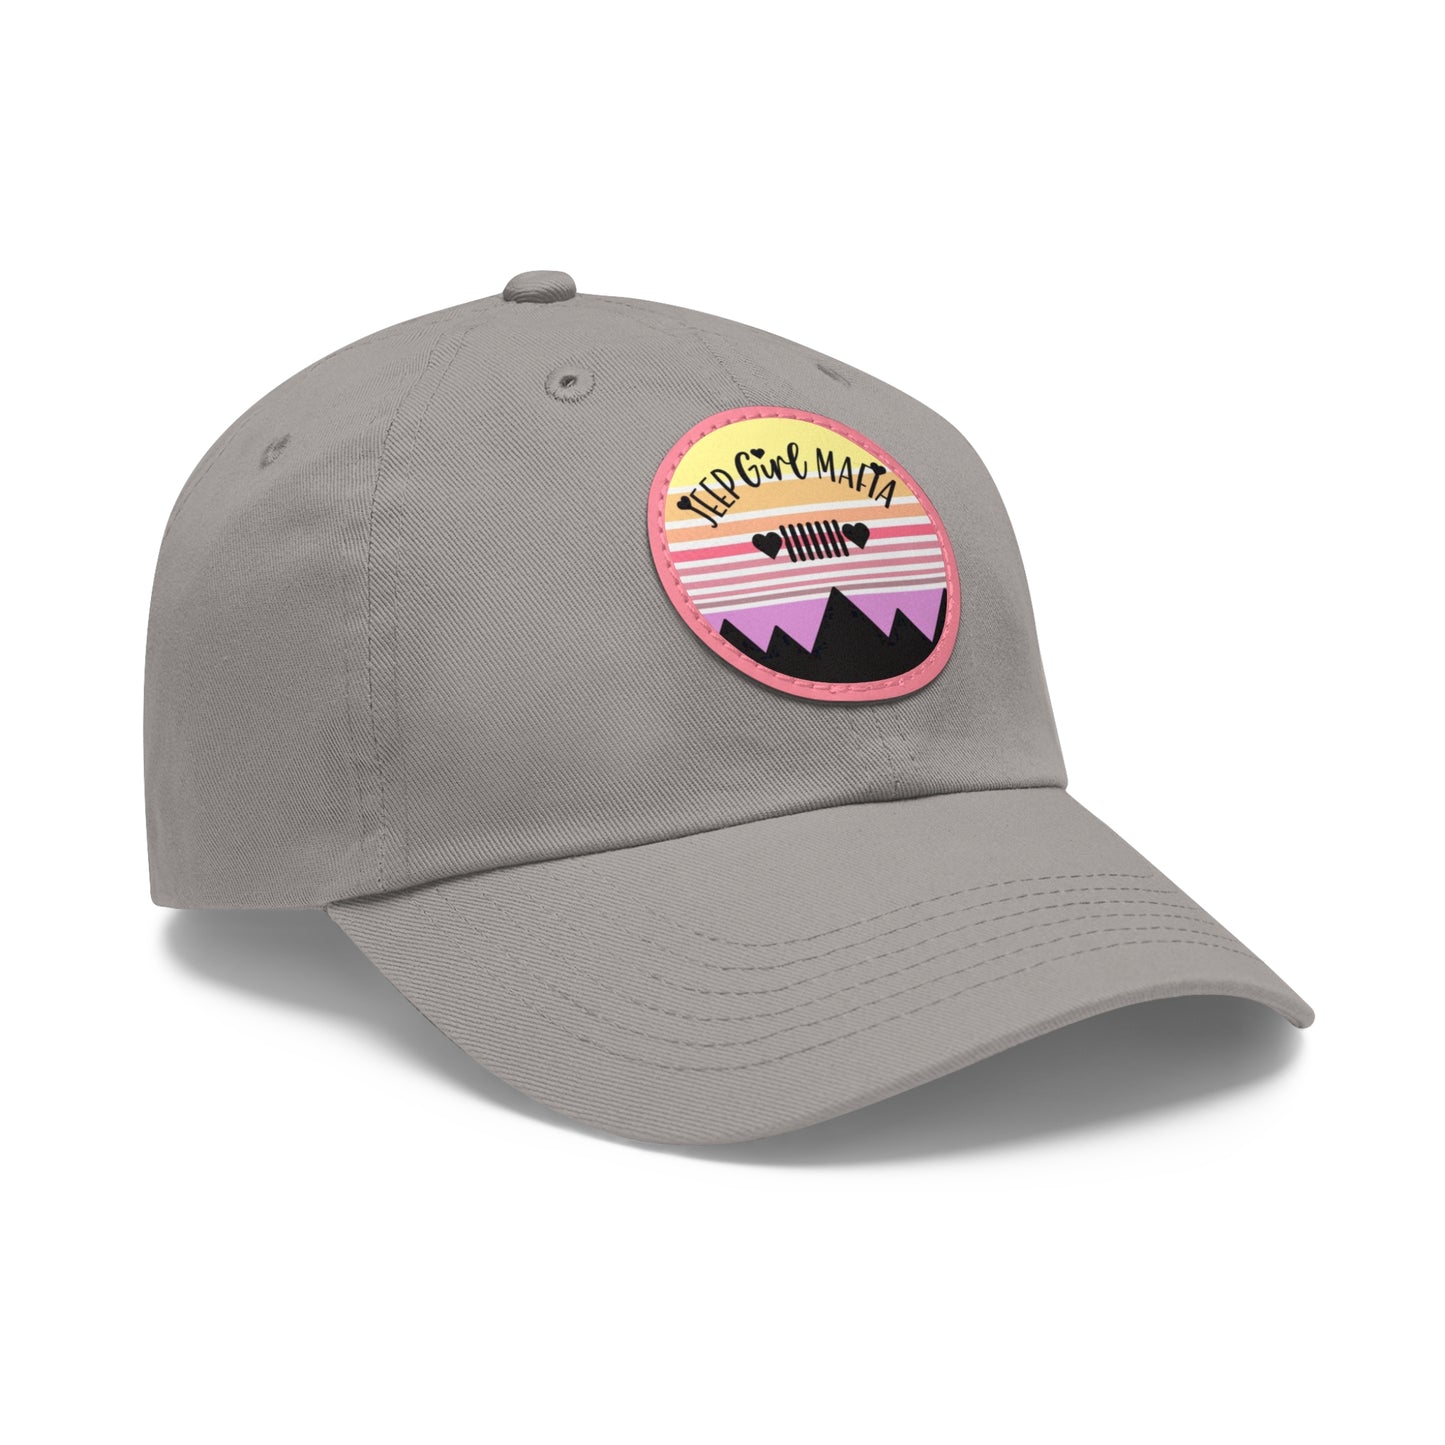 Jeep Girl Mafia Hat with Leather Patch (Round)